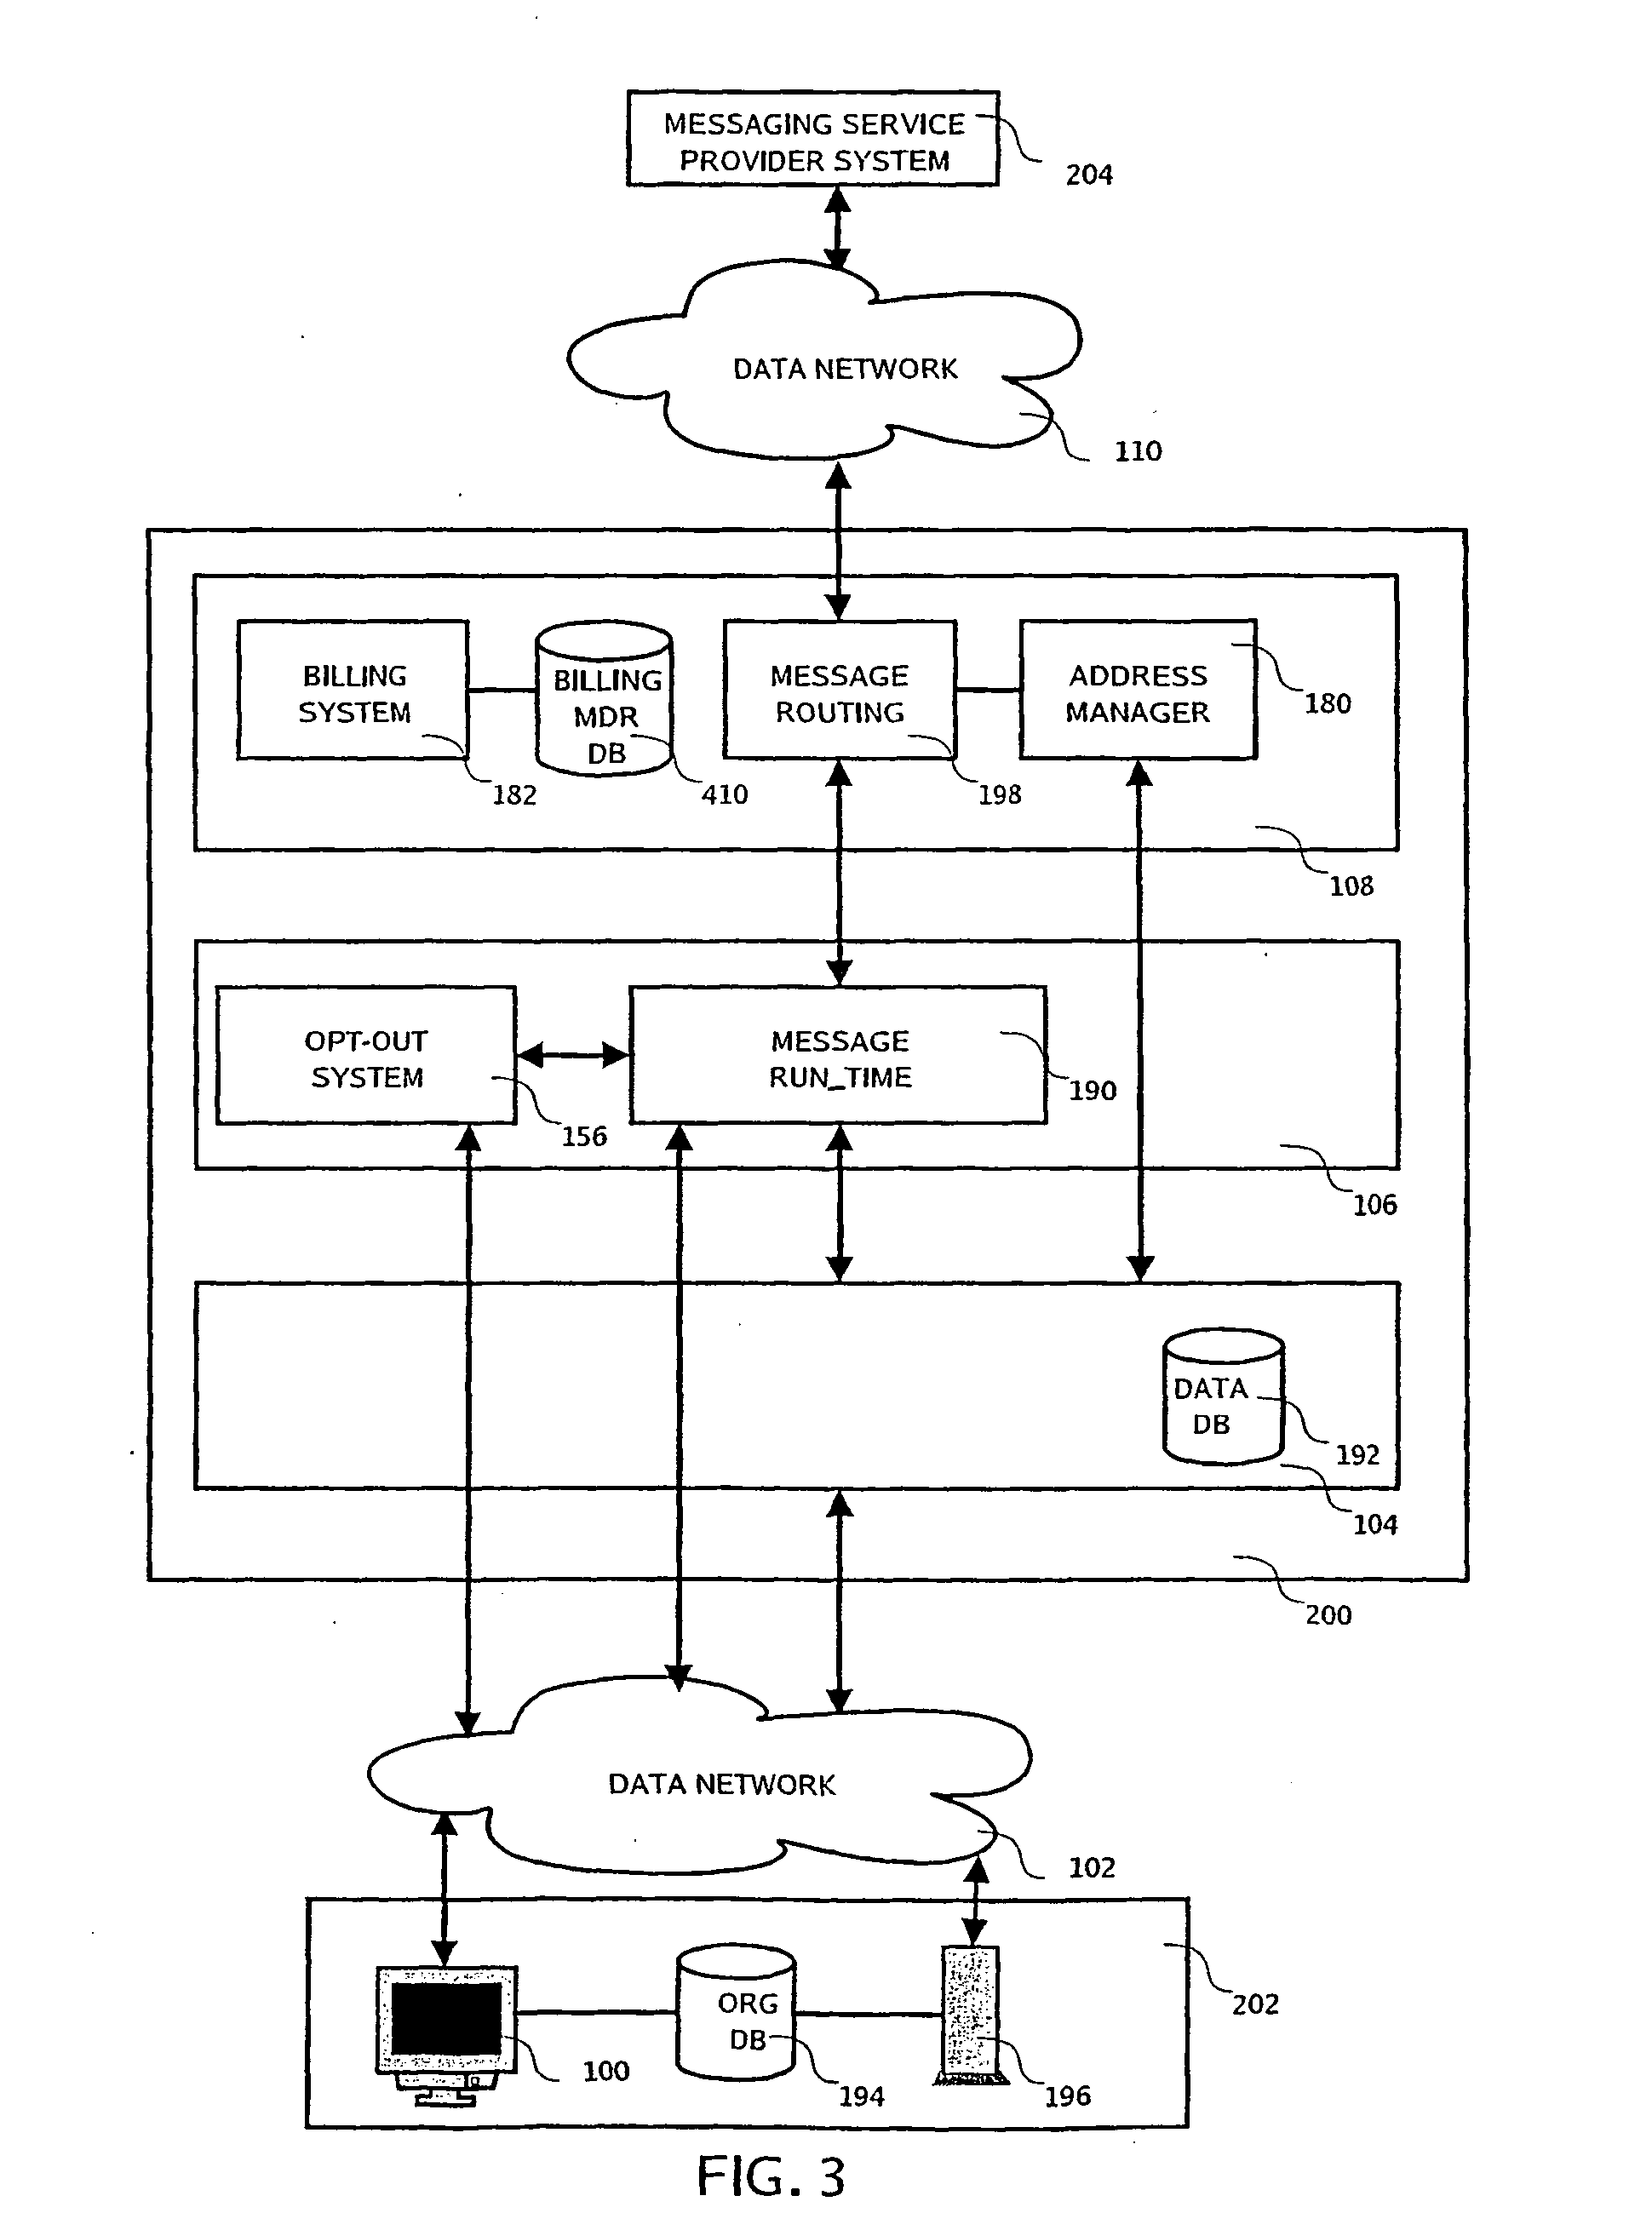 Integrated interactive messaging system and method